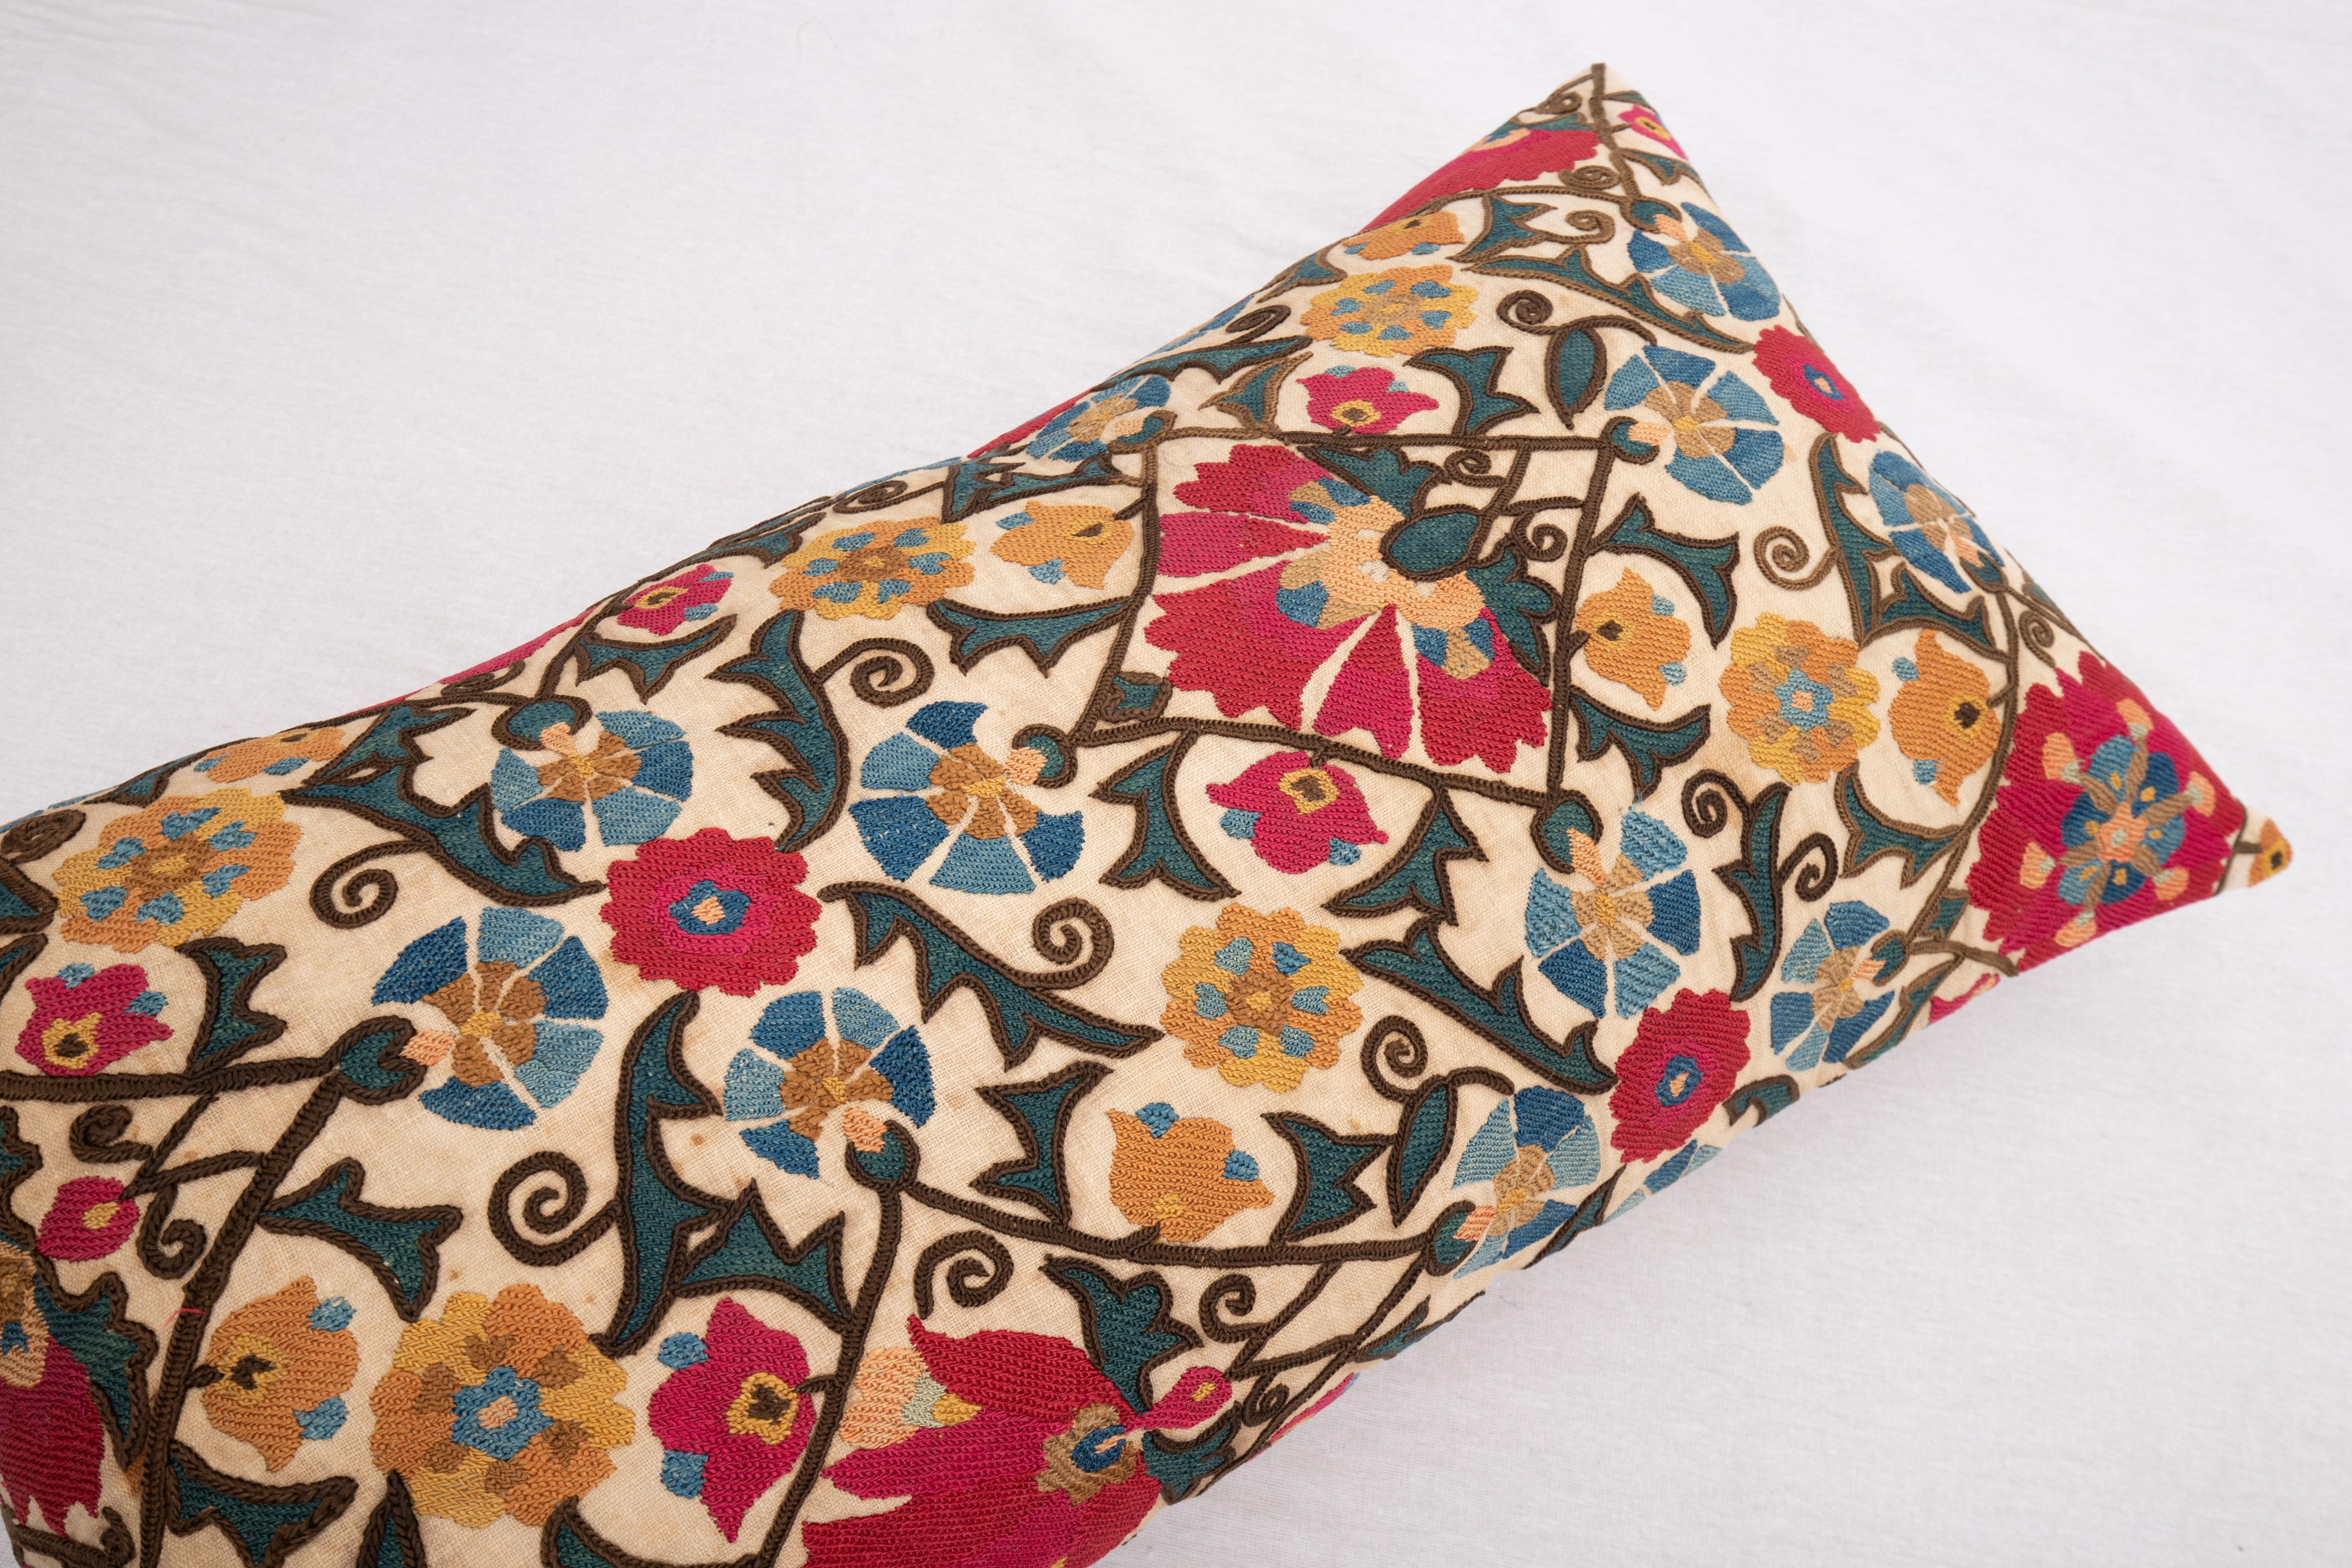 20th Century Suzani Pillow Case Made from an Antique Suzani Fragment, 19th Century